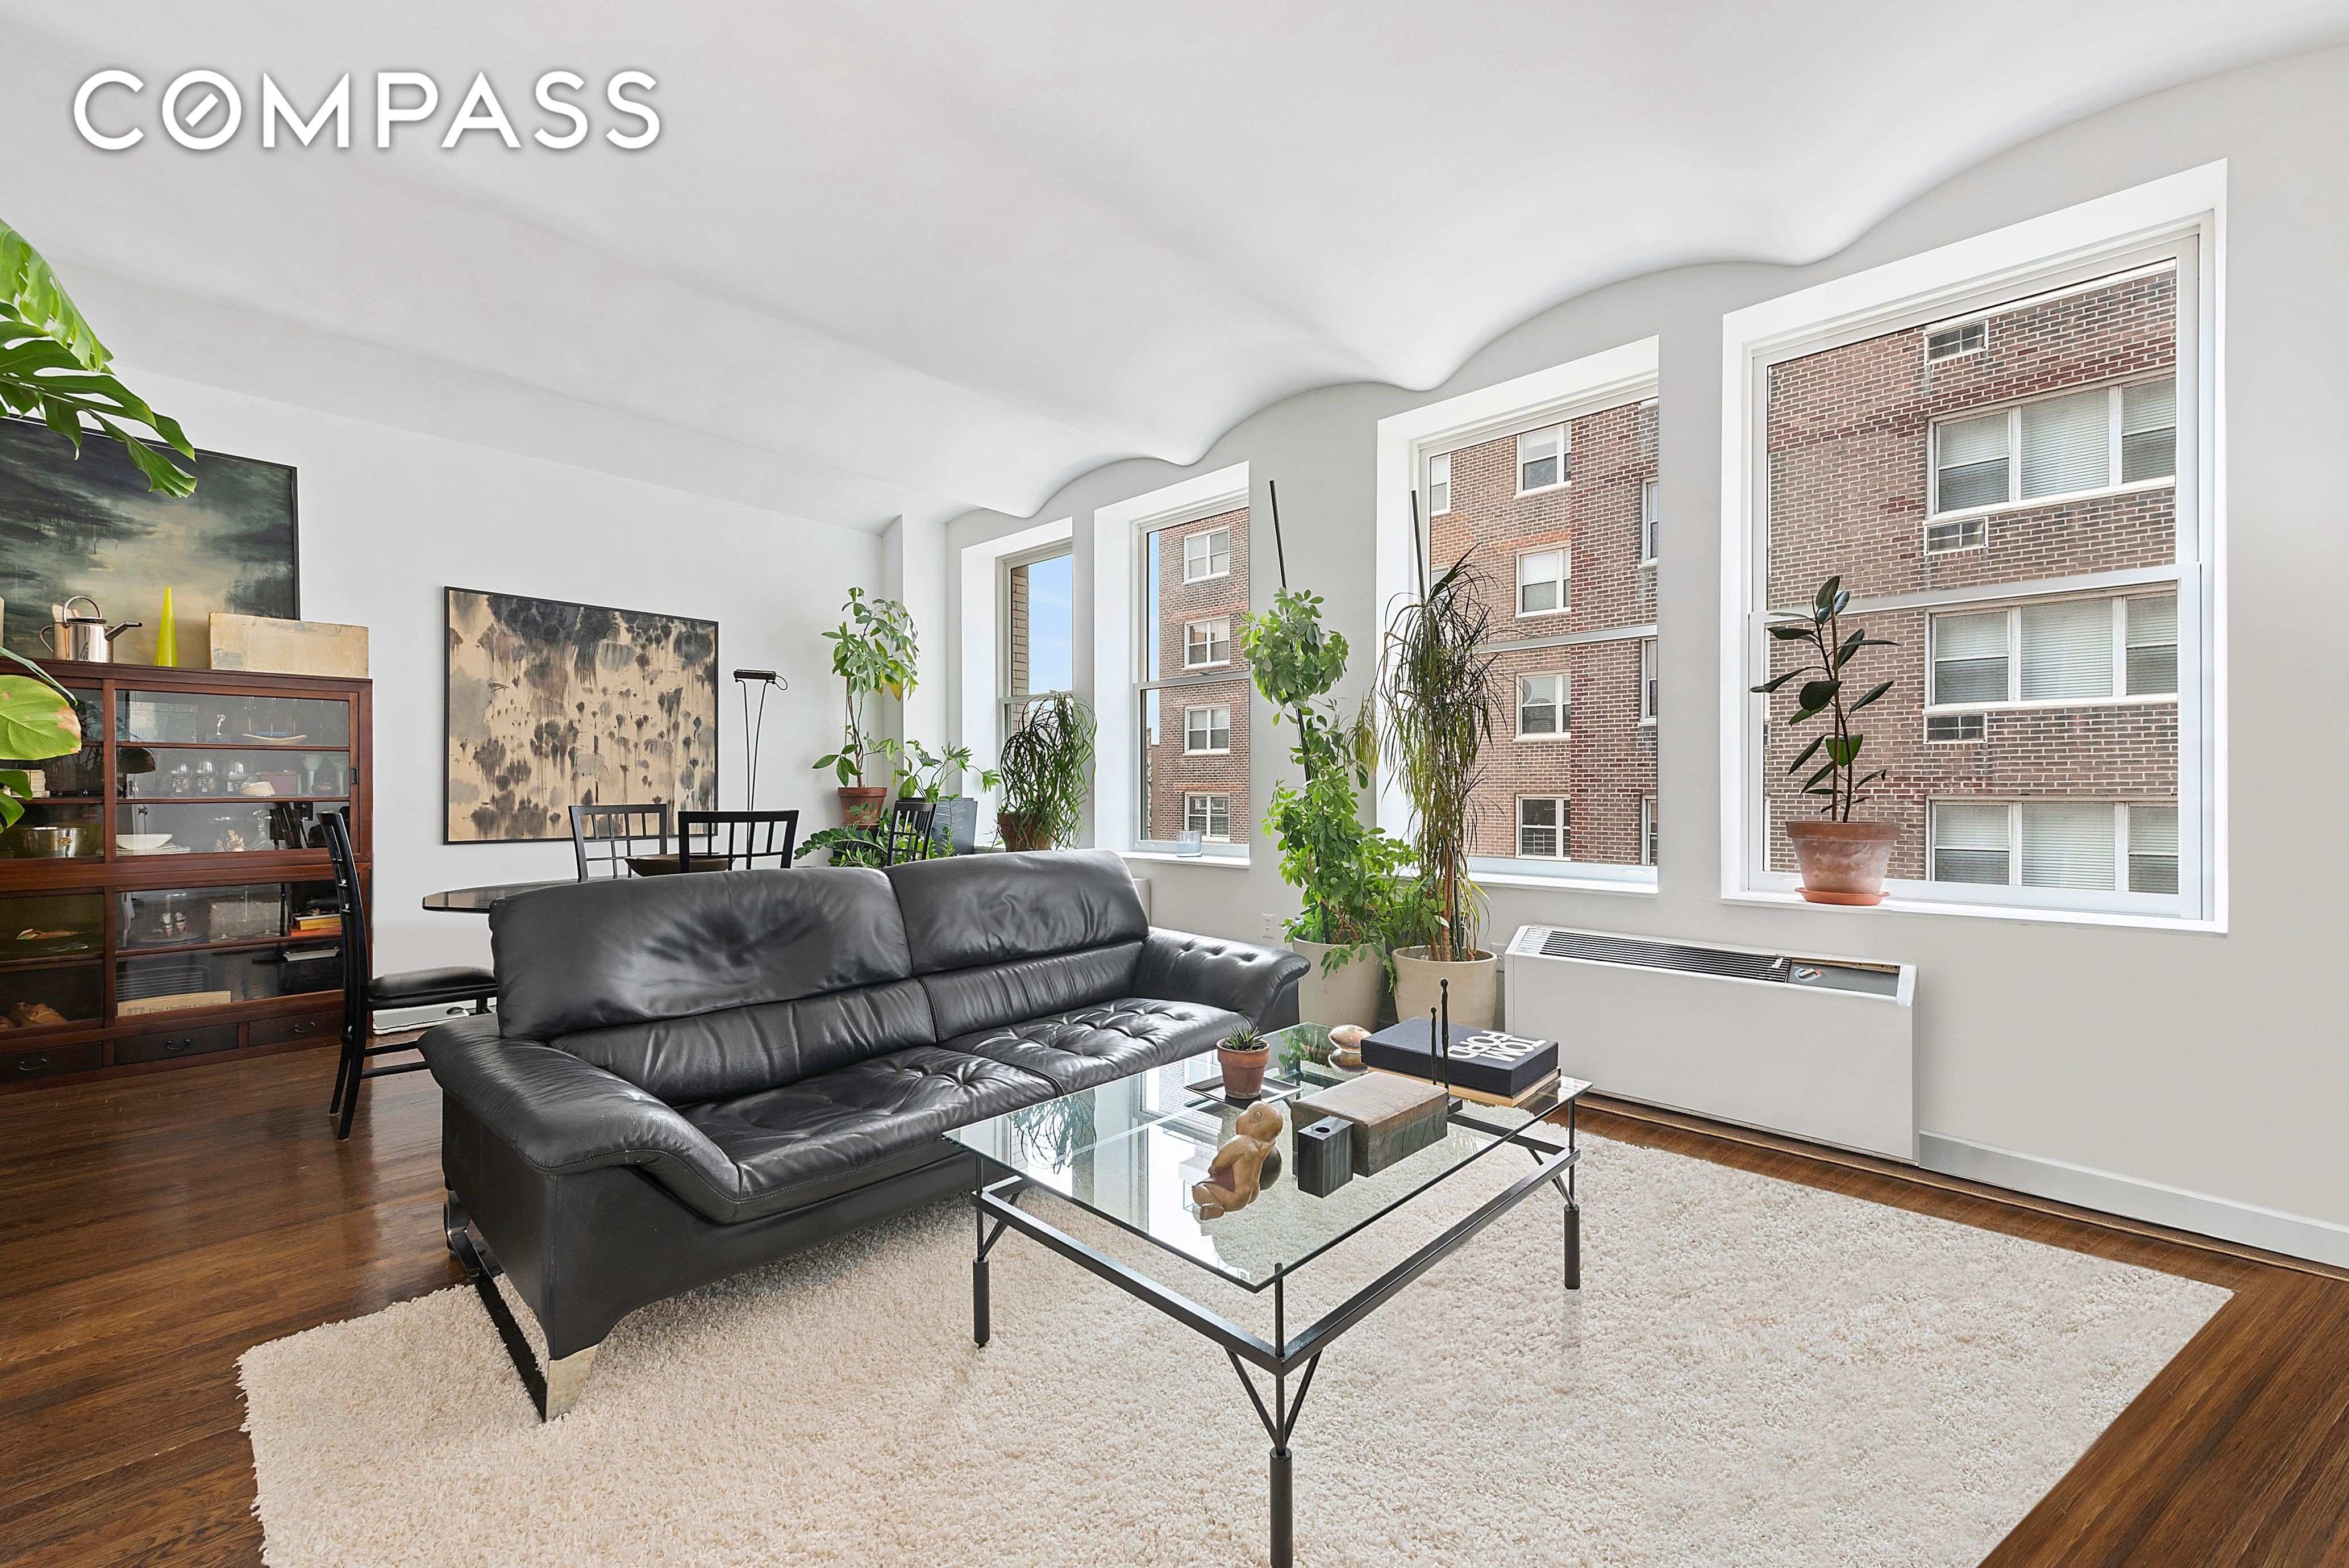 Co-op Properties for Sale at 9 BARROW ST, 5BC West Village, New York, New York 10014